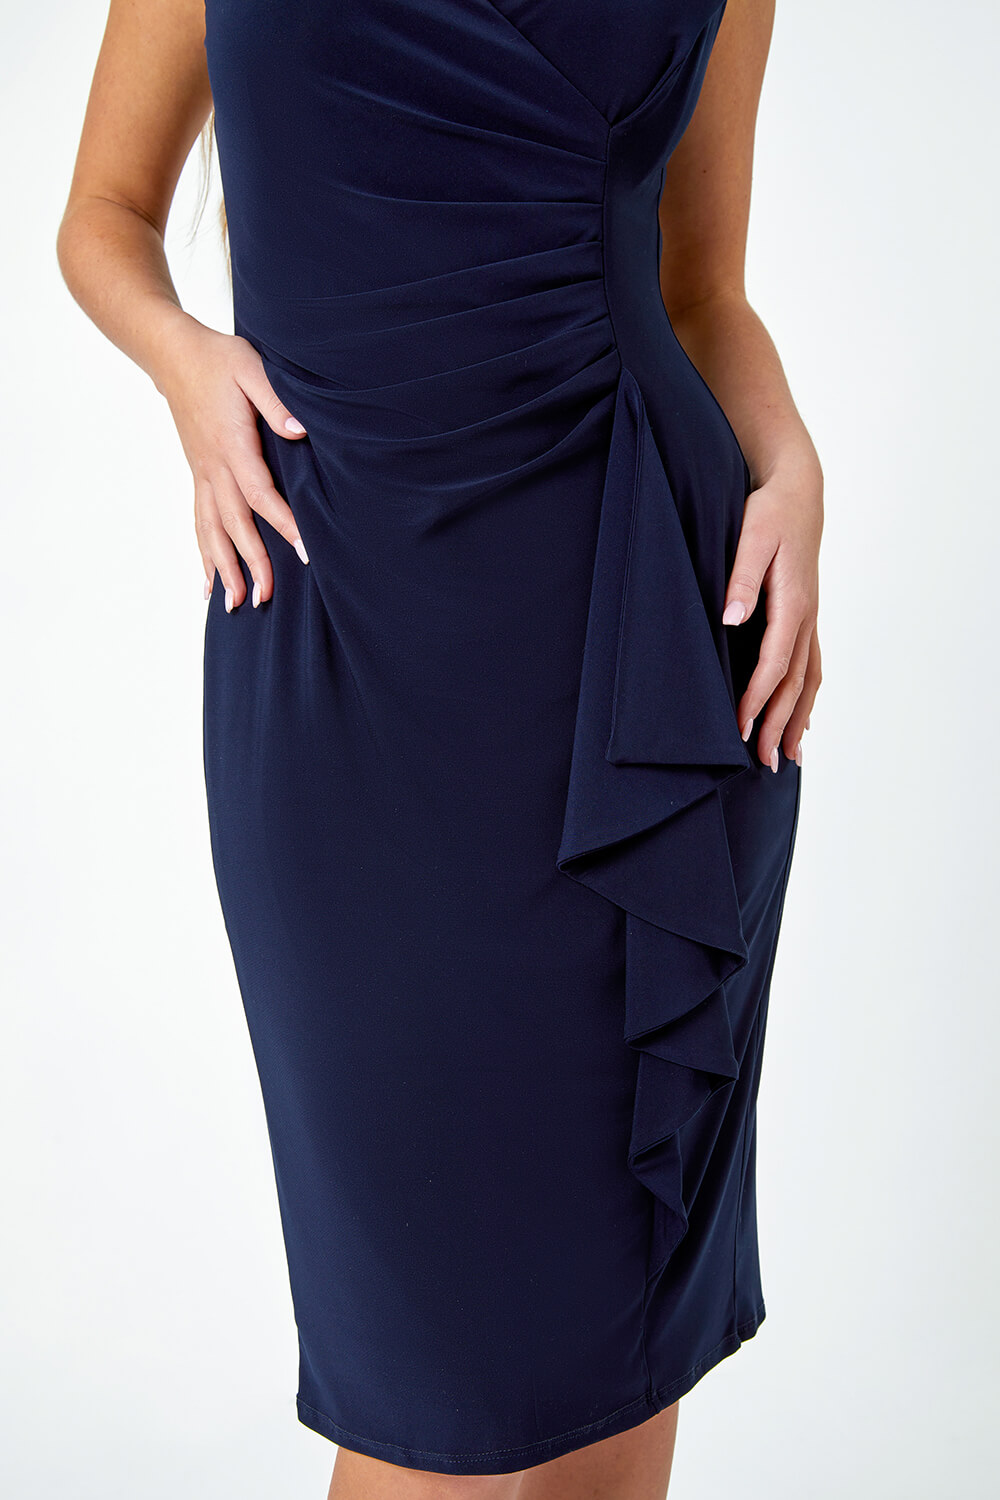 Navy  Petite Ruched Waterfall Stretch Dress, Image 5 of 5